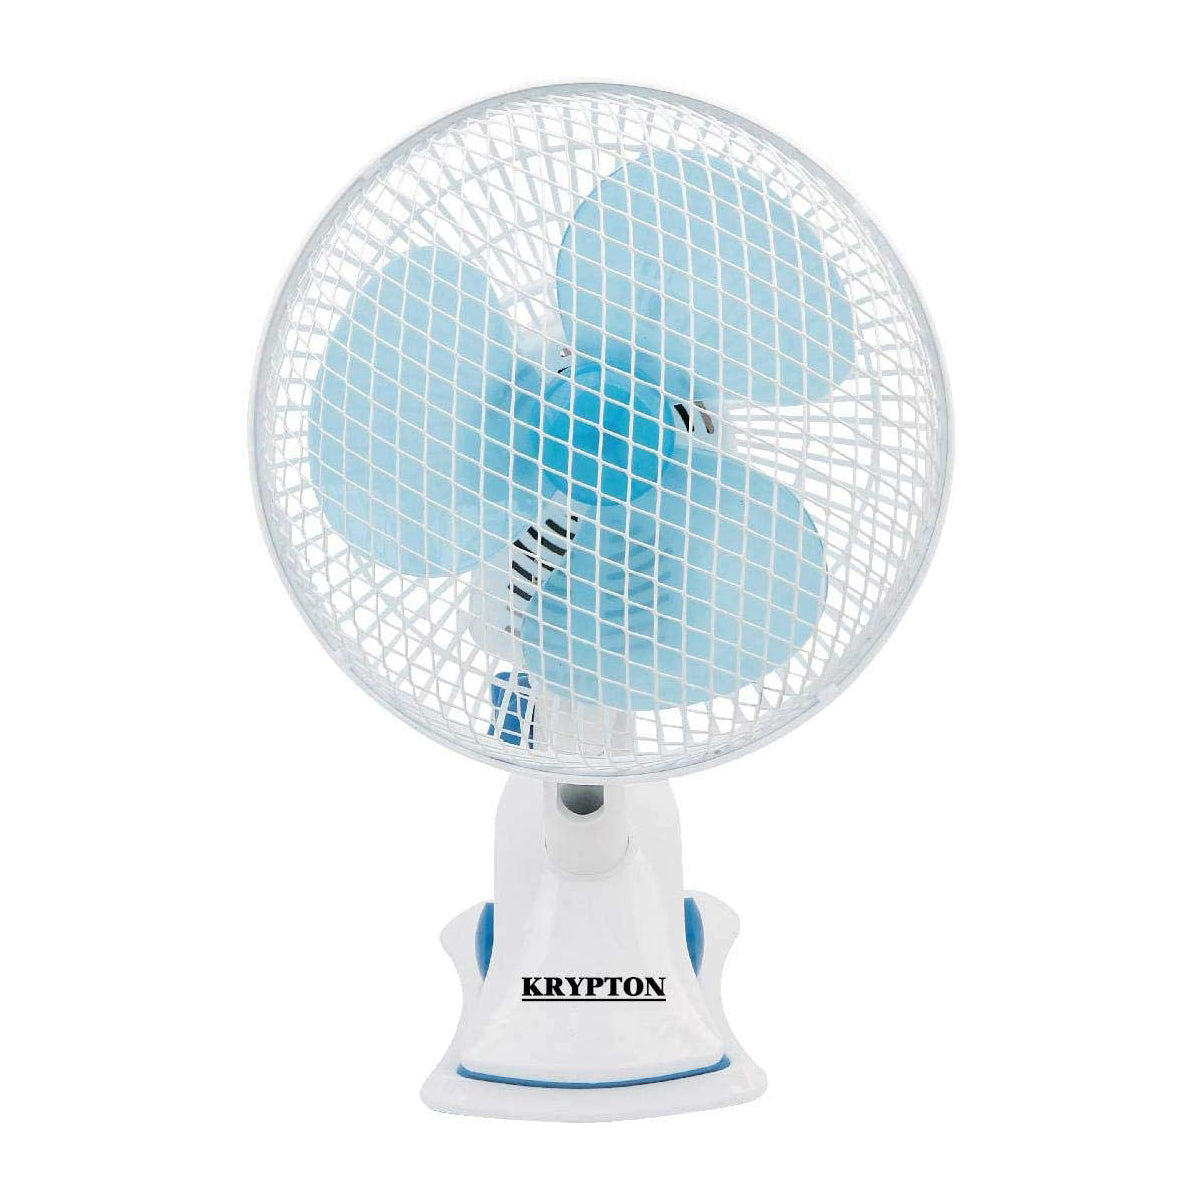 krypton-8-table-clip-fanKrypton 8-Inch Table Fan - 2 Speed Settings with Oscillating/Rotating and Static Feature - Electric Portable Desktop Cooling Fan for Desk Home or Office Use